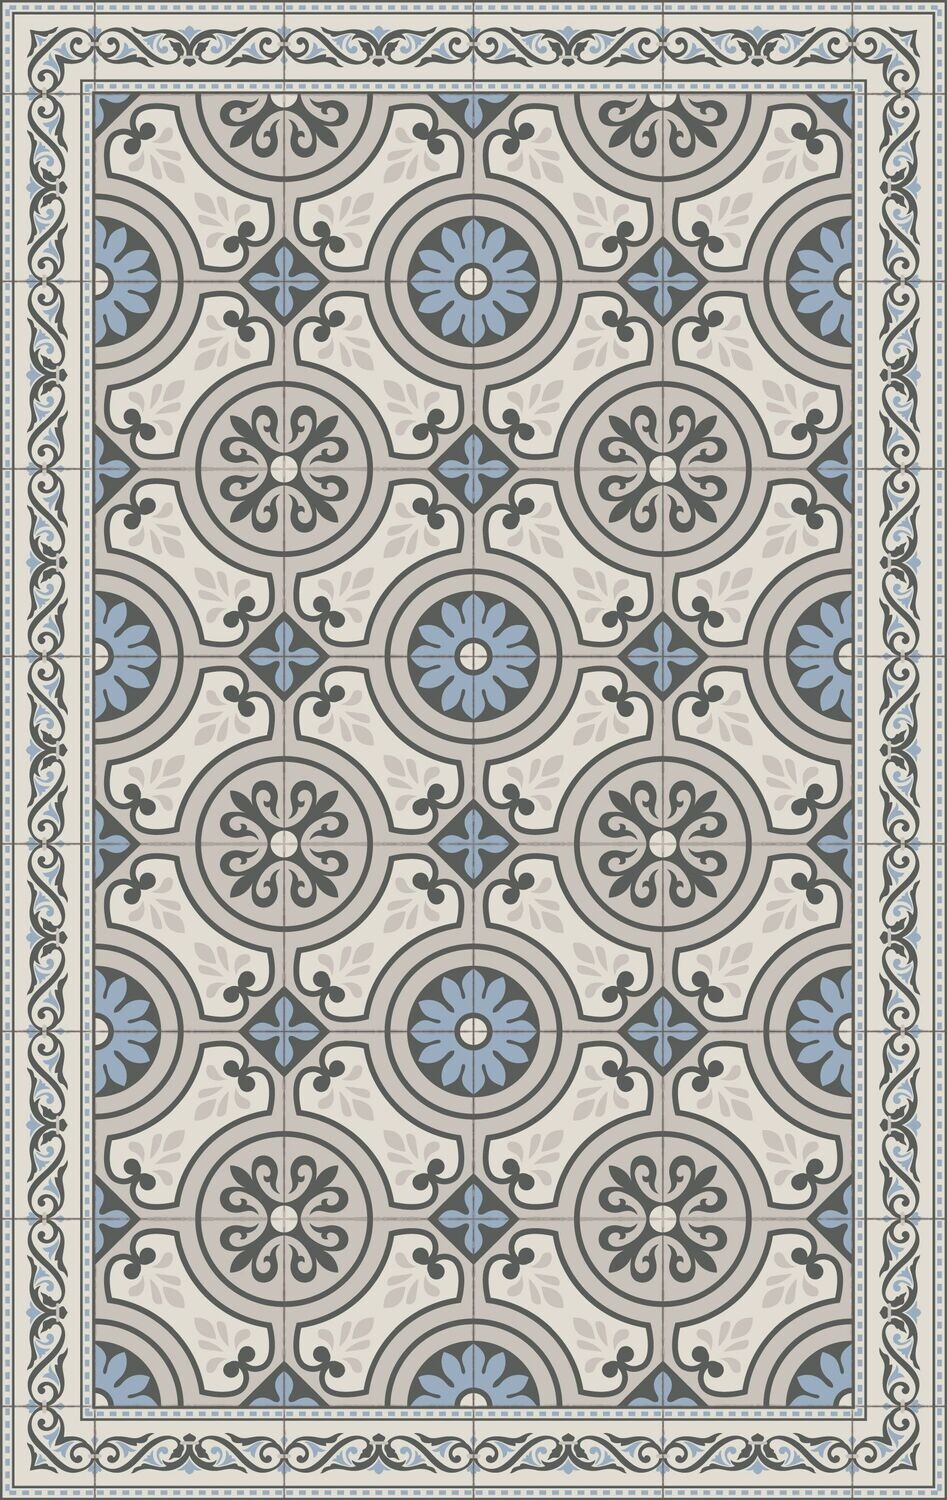 VINYL RUG SINSPIN IN BLUE AND GREY 60x95cm